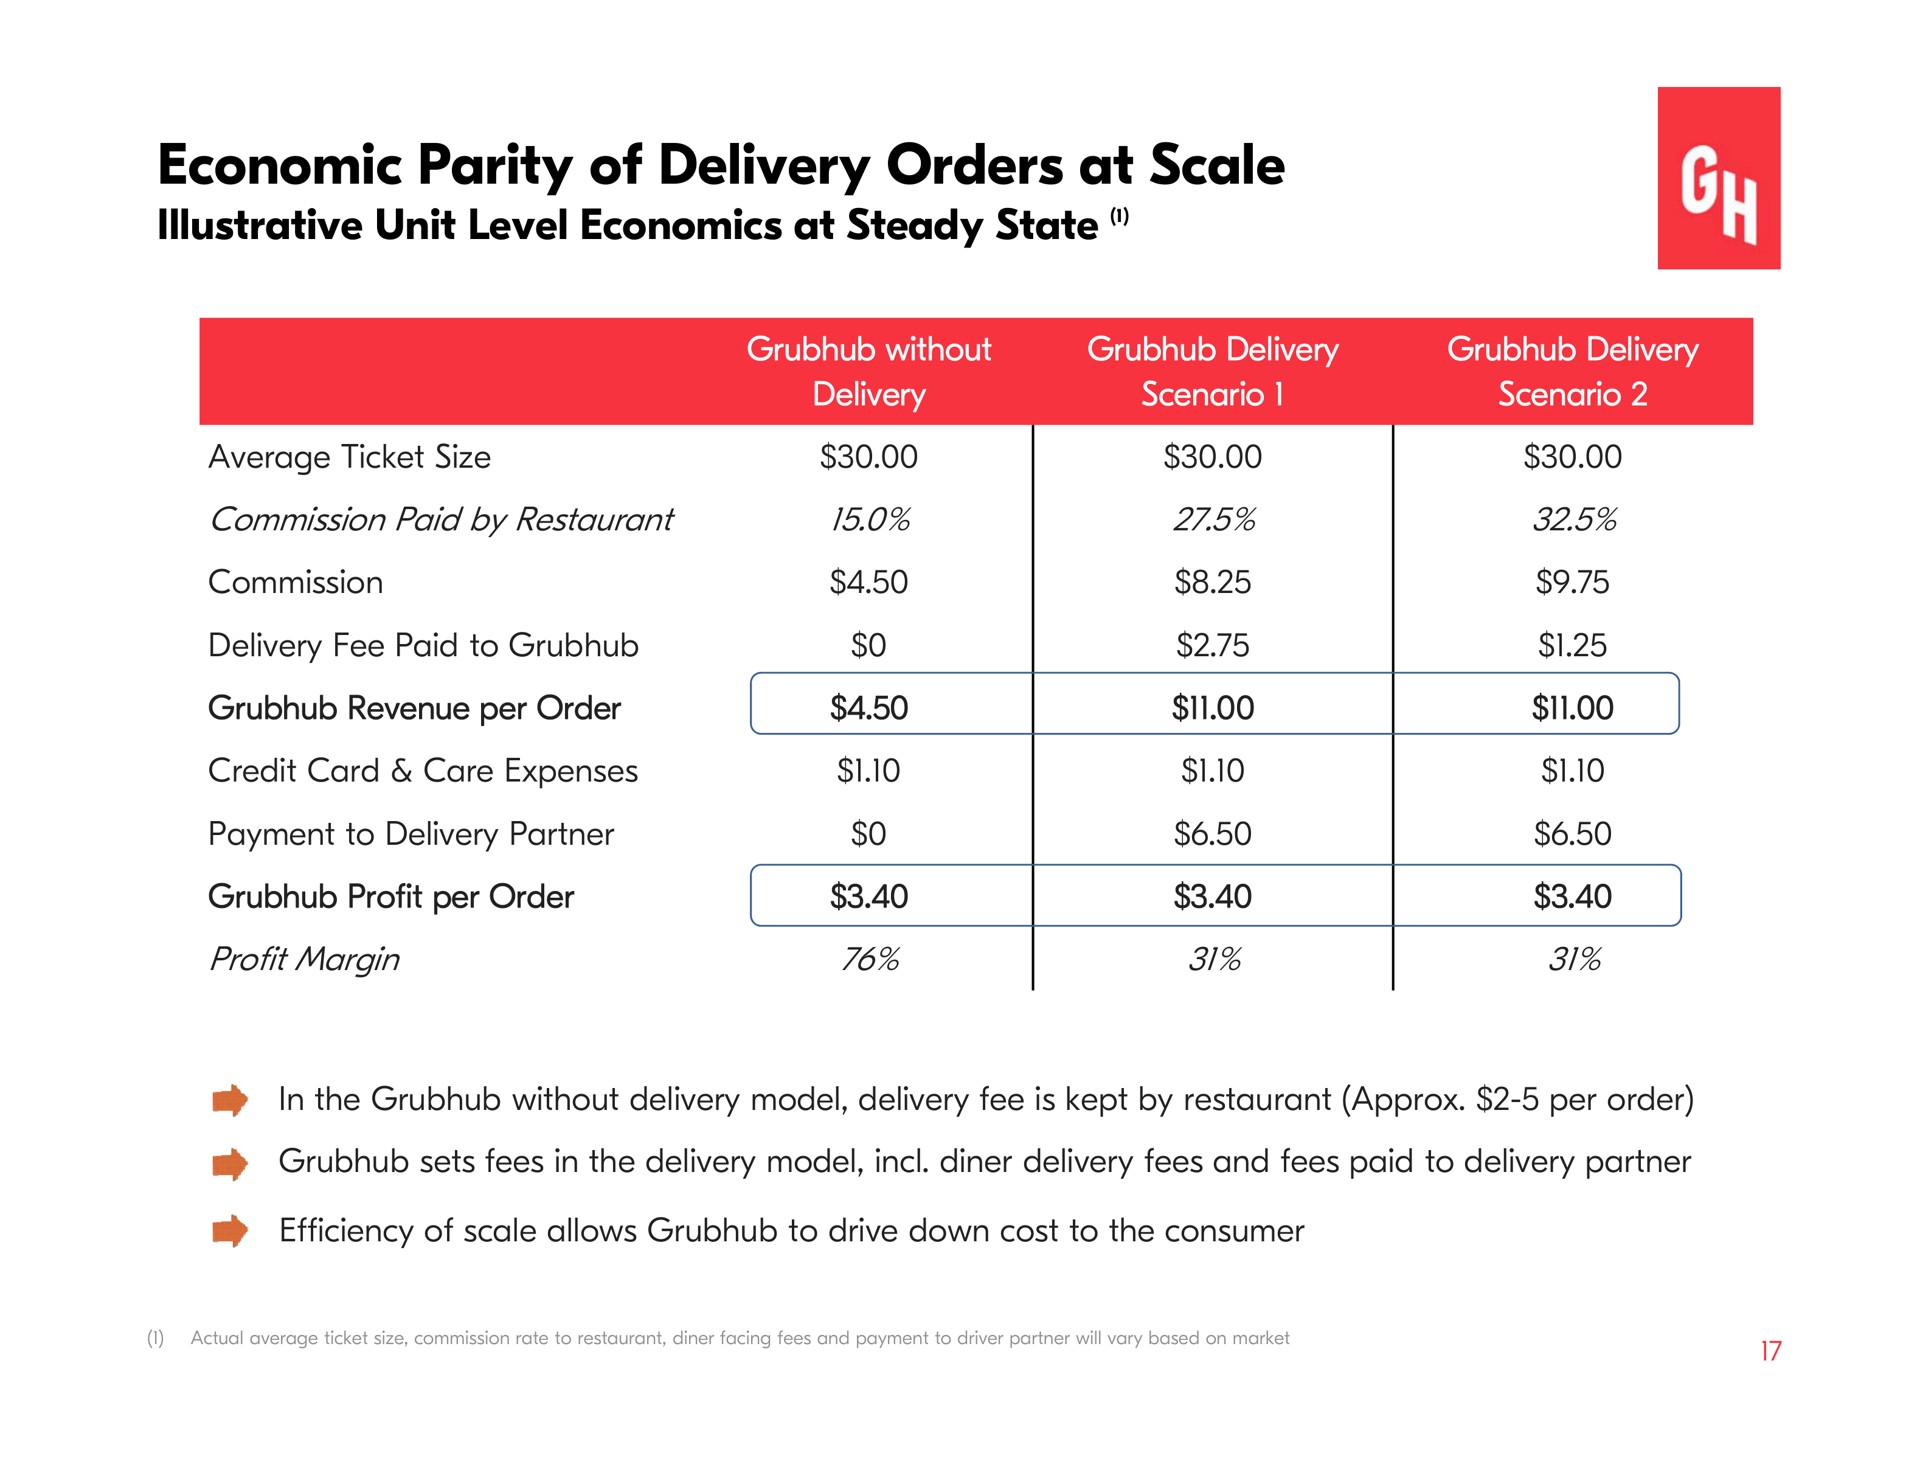 economic parity of delivery orders at scale illustrative unit level economics at steady state | Grubhub